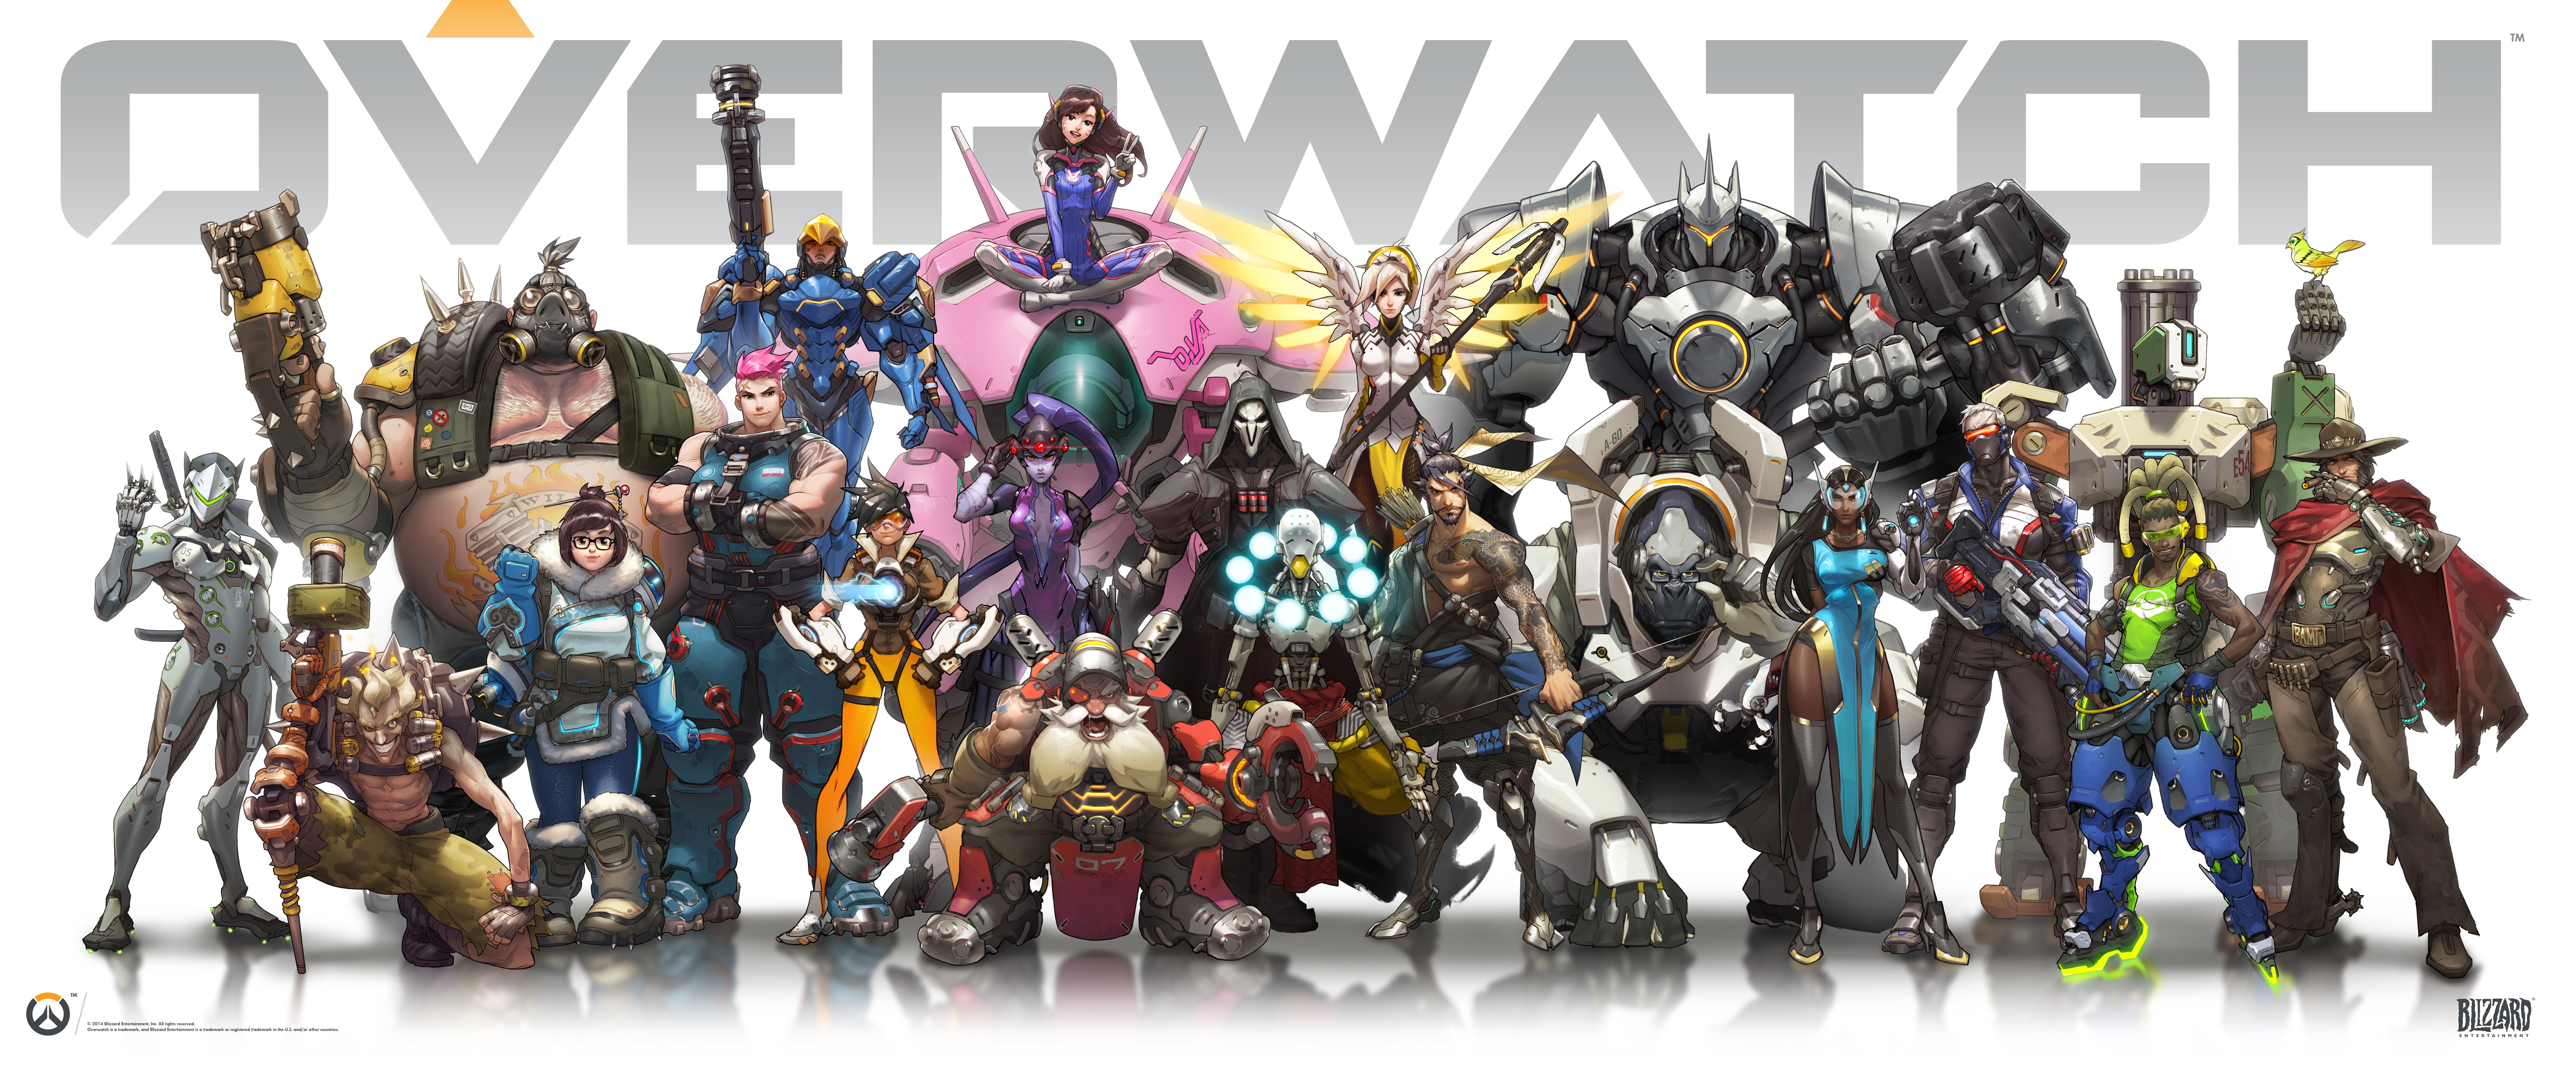 overwatch wallpaper,fictional character,action figure,hero,toy,fiction